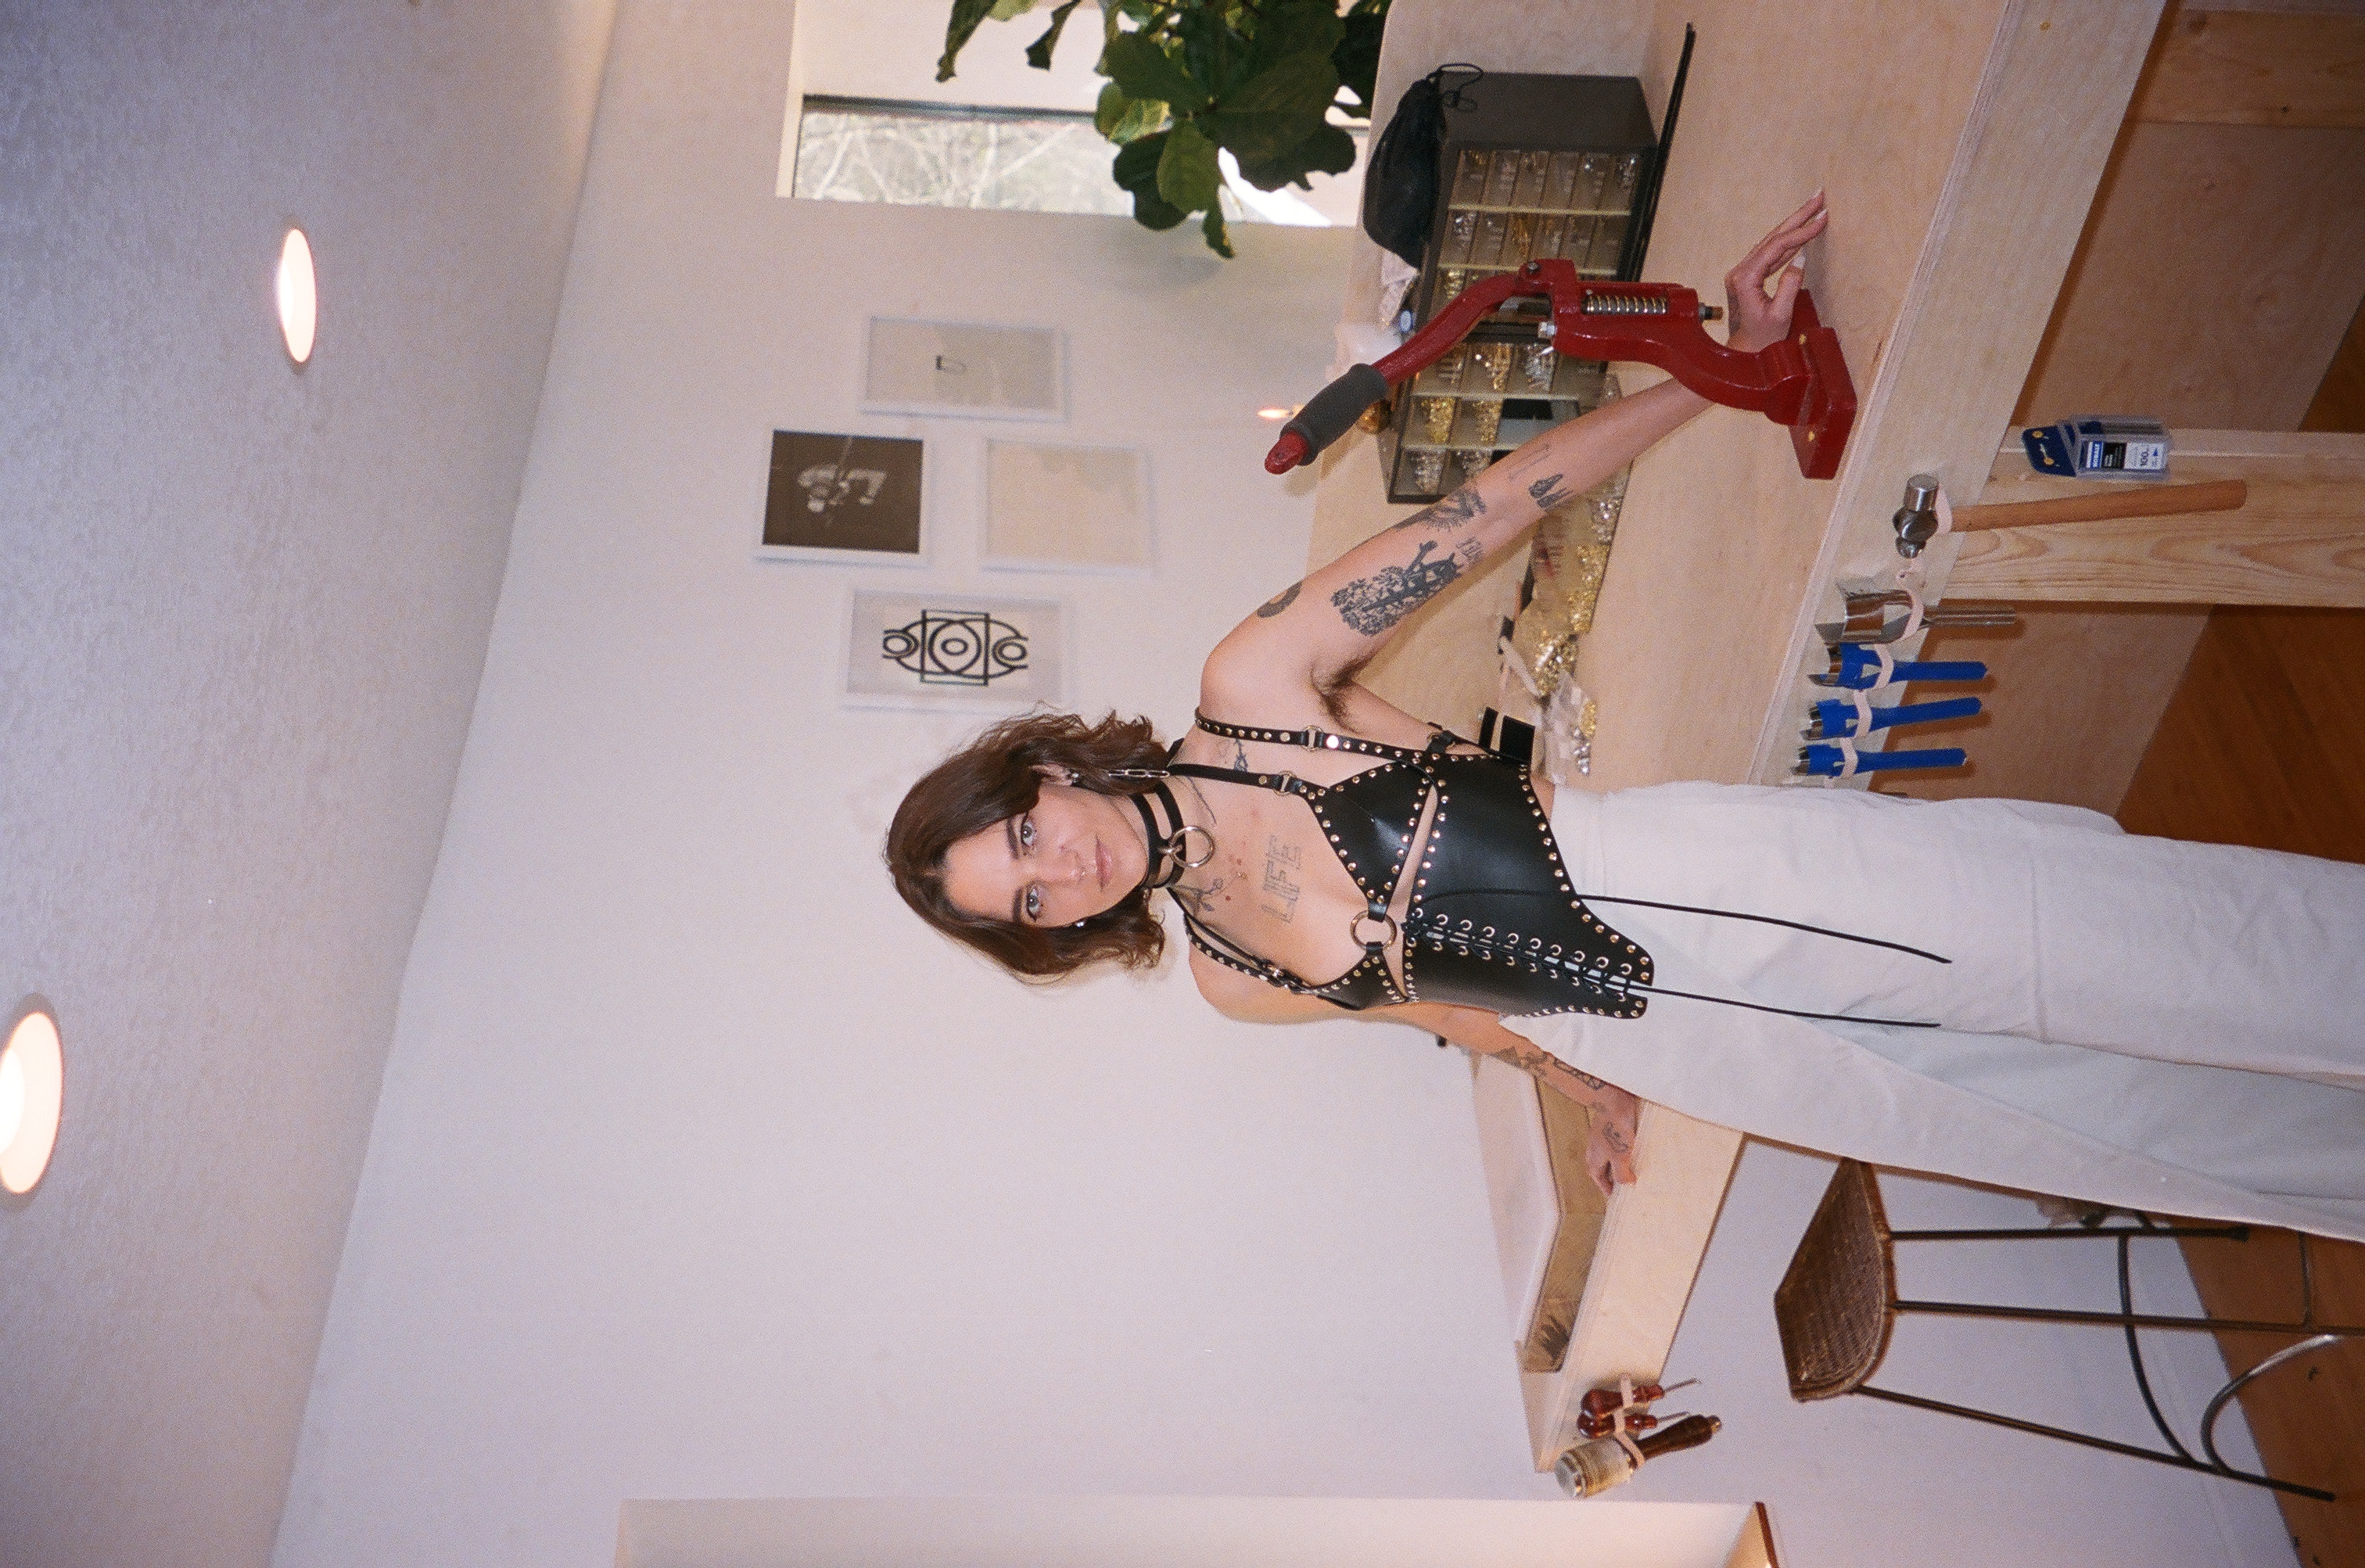 hunter savoy in a leather harness leaning against her work table